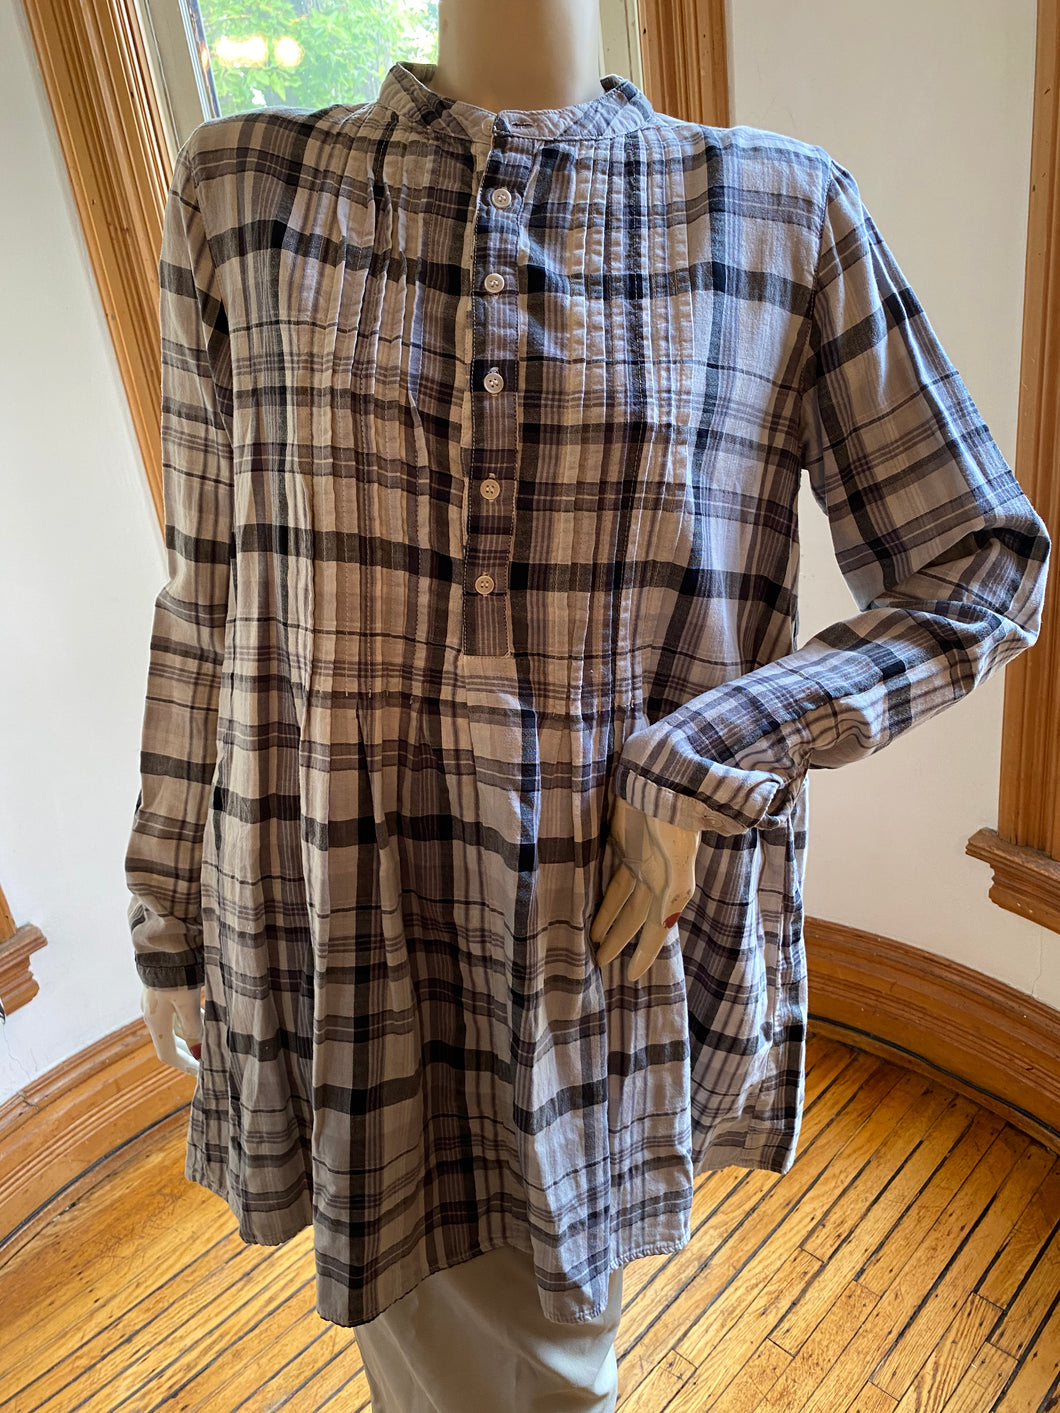 Free People x CP Shades Pintucked Gray/White Plaid Yoko Tunic Top, size XS runs large (42 bust)